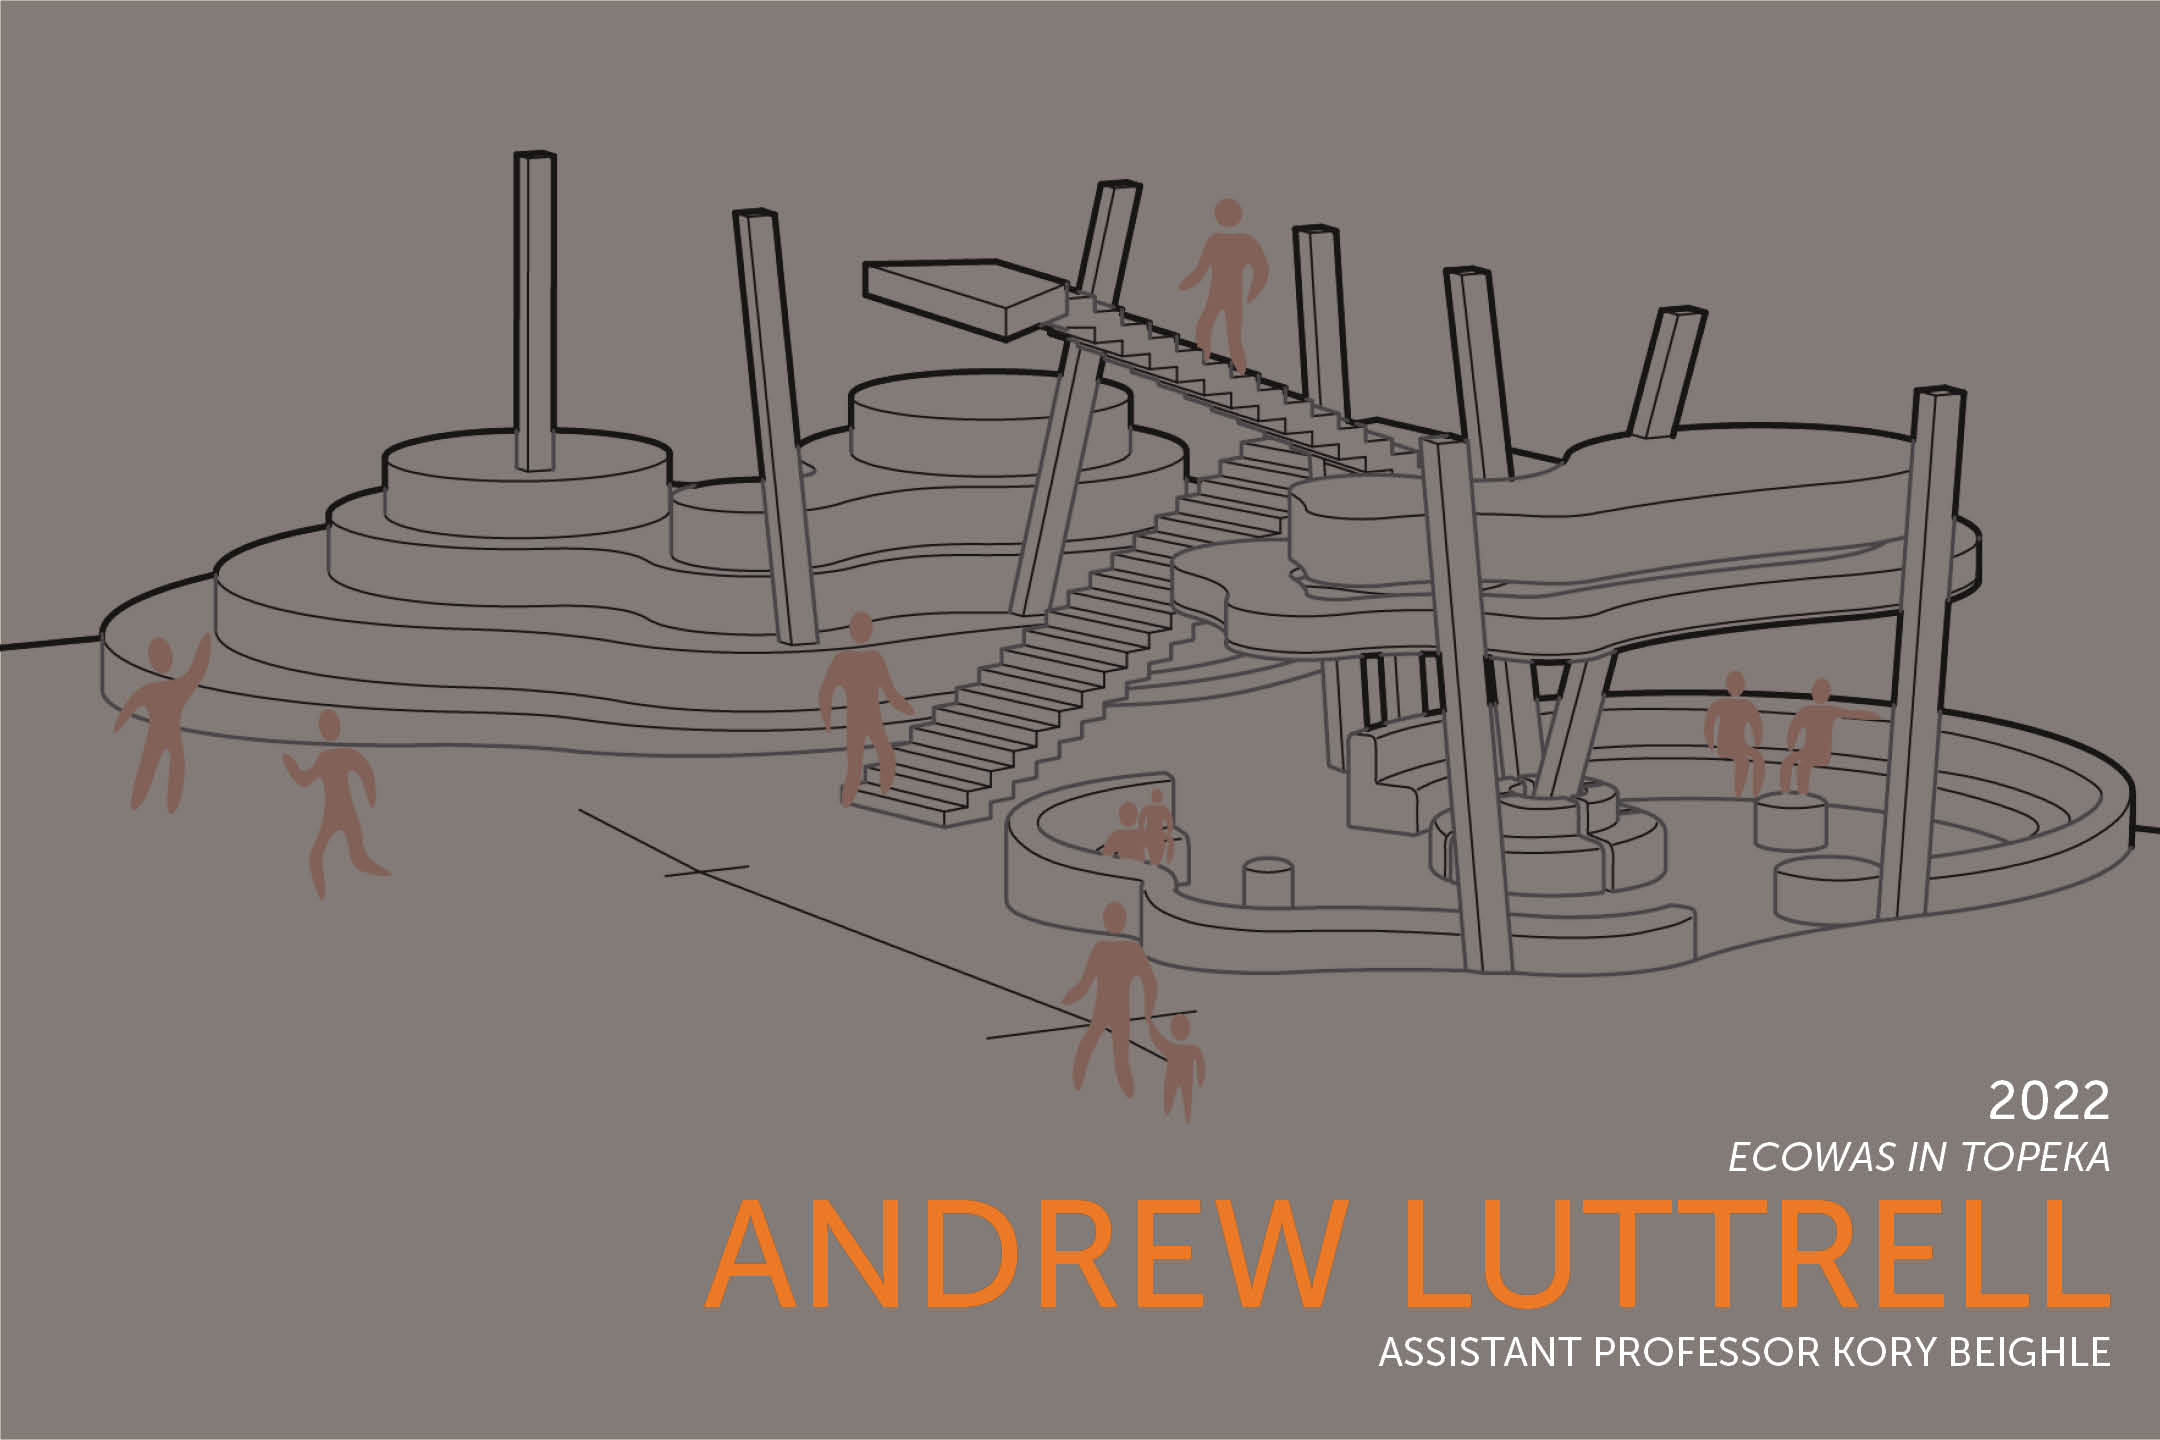 Andrew Luttrell